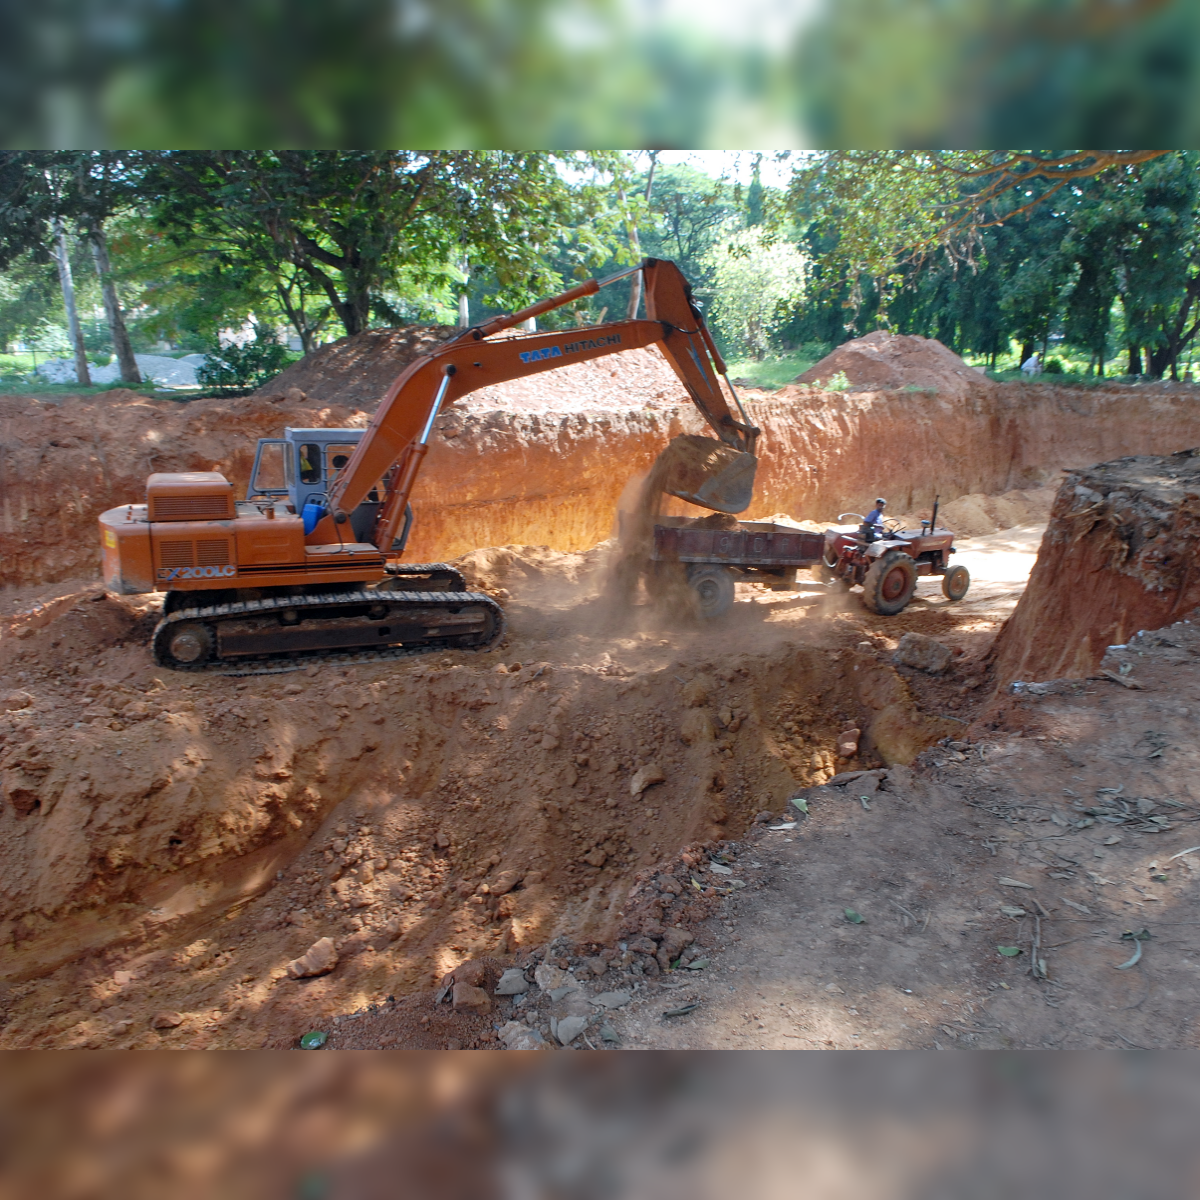 Earthmoving Equipment: Types and uses in construction